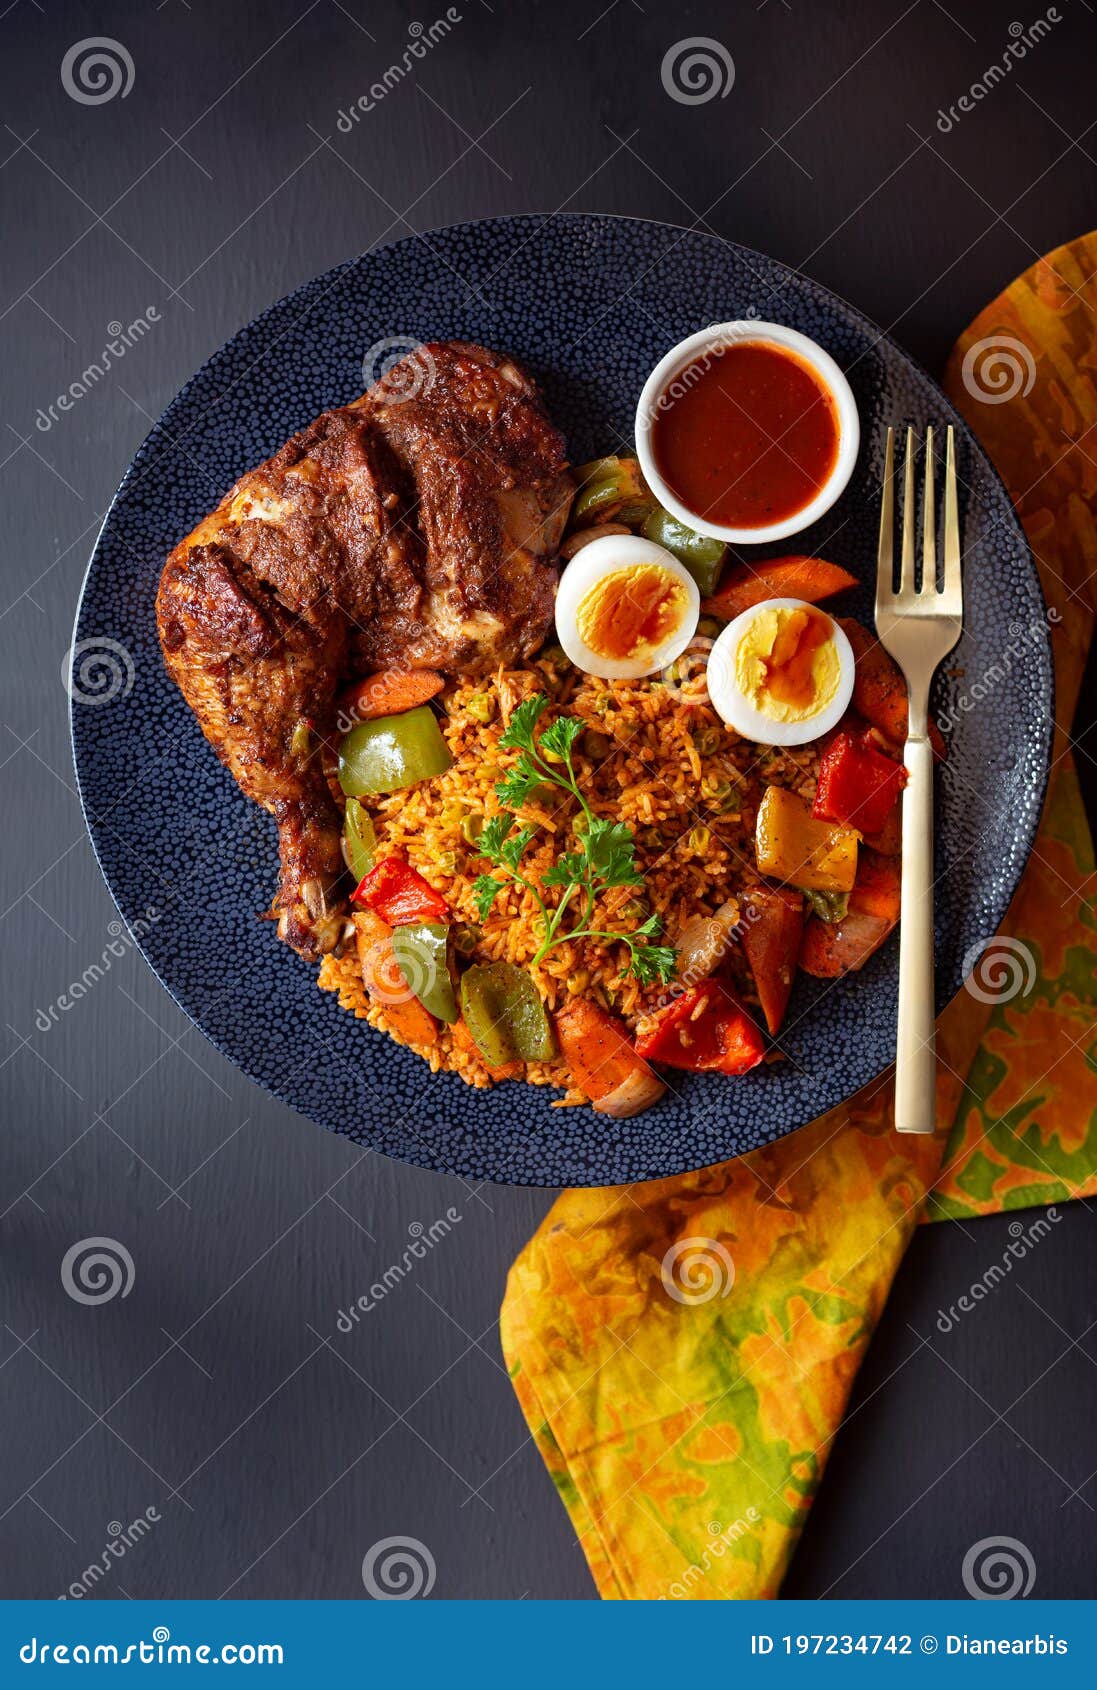 How To Cook Jollof Rice With Egg Or Boiled Egg - Soft ...